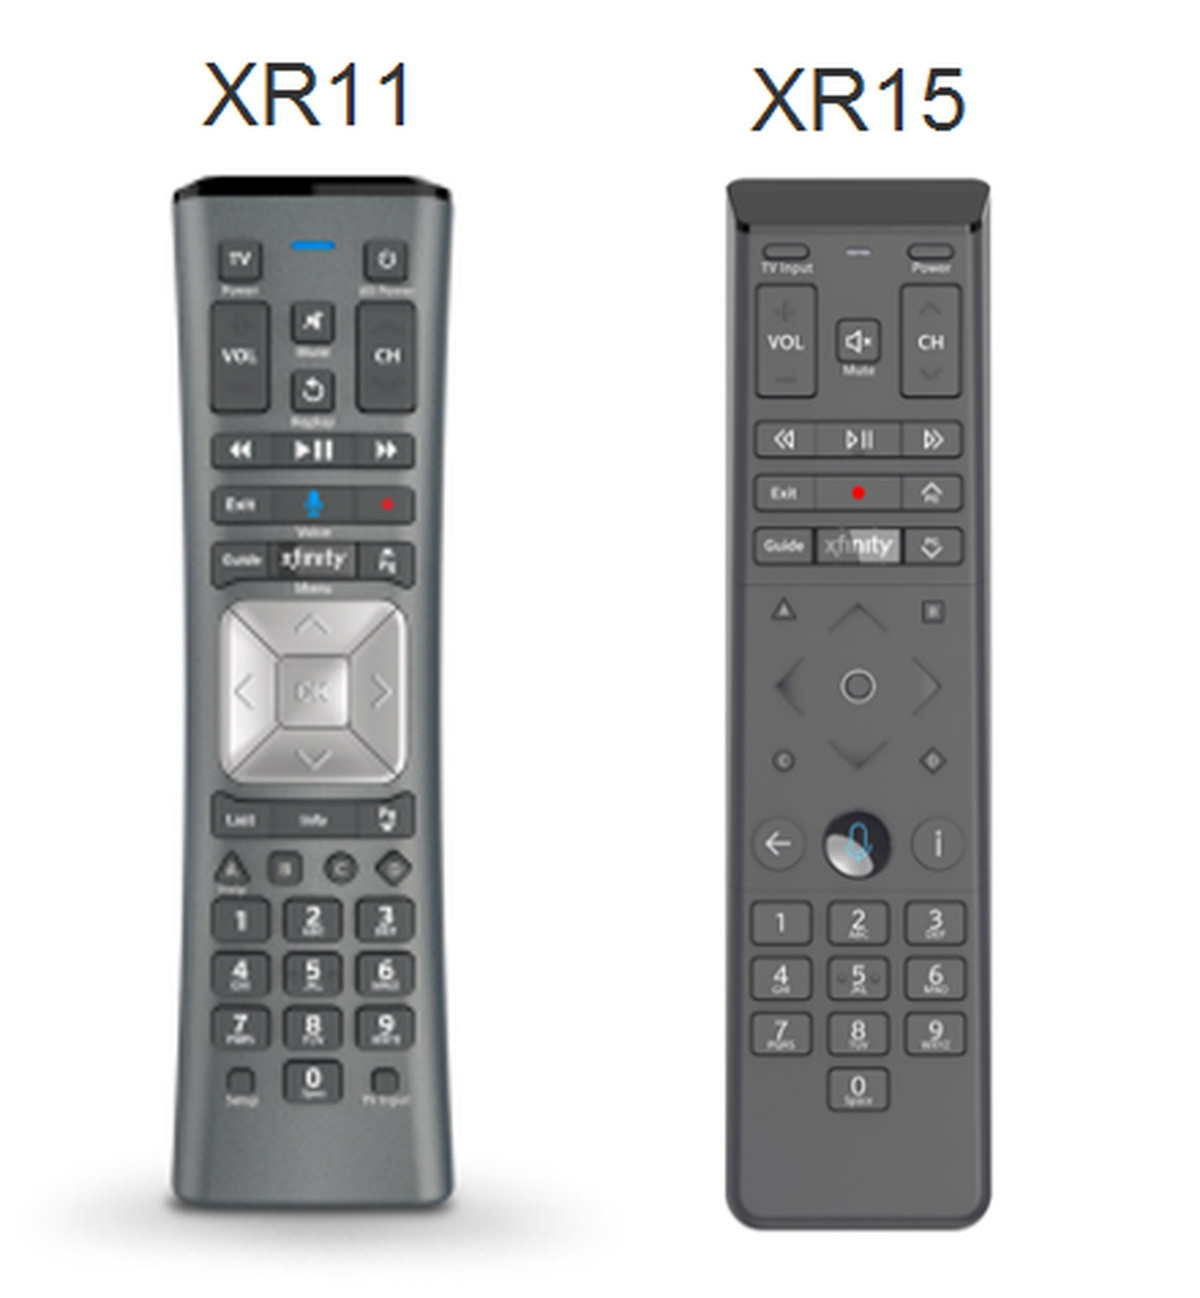 User manual for comcast remote control xr15-uq pc